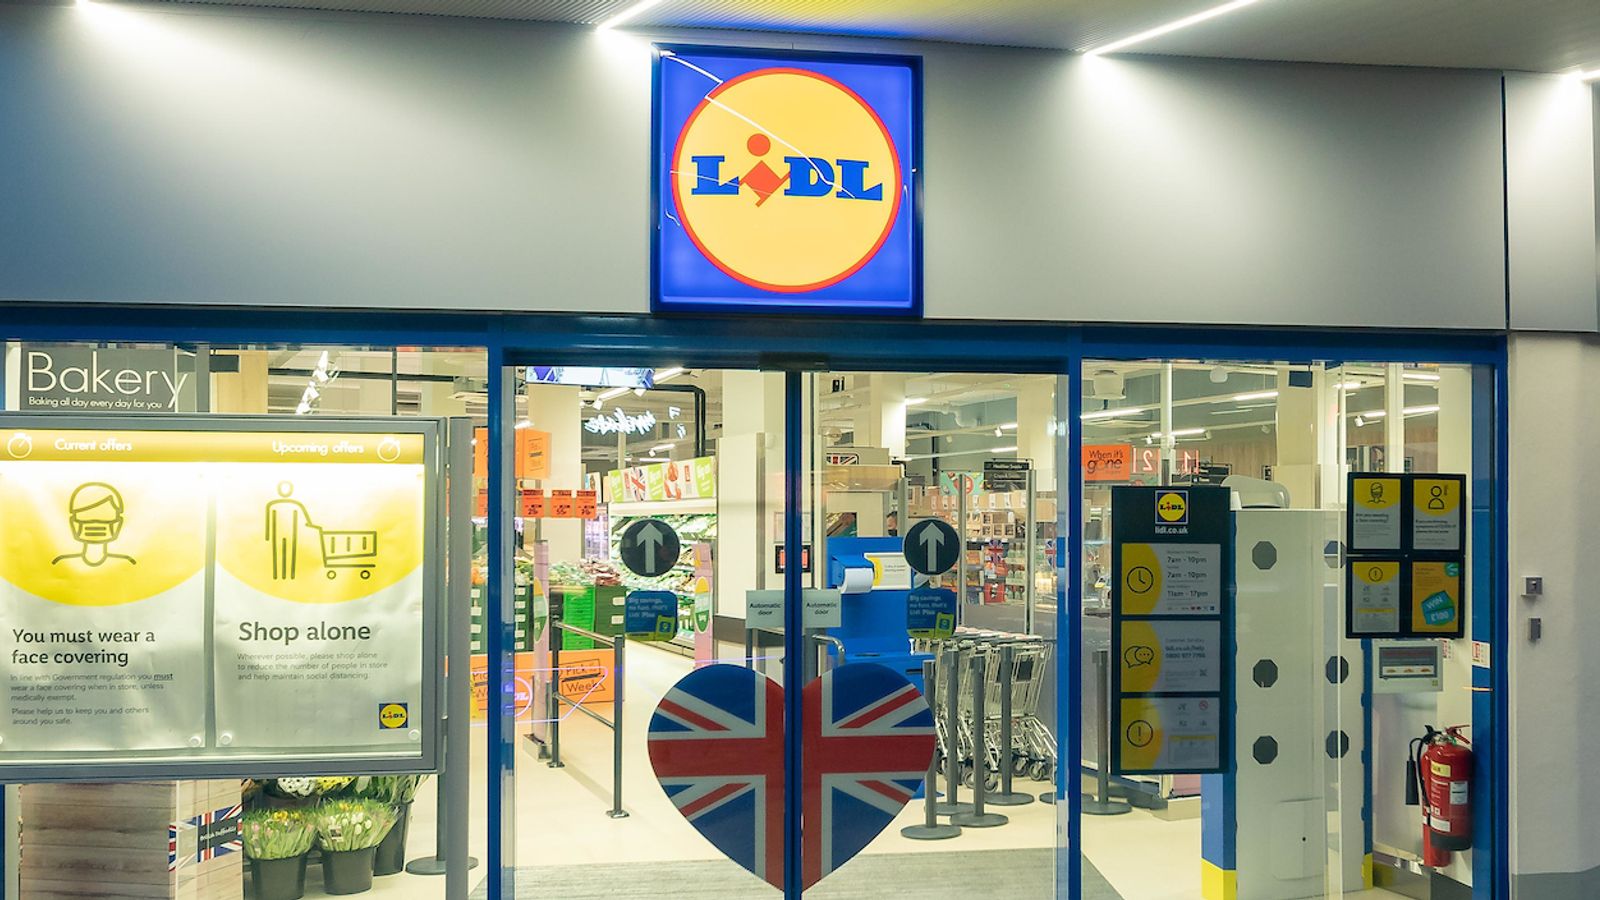 Lidl rumoured to be close to launching a UK web store - Retail Connections